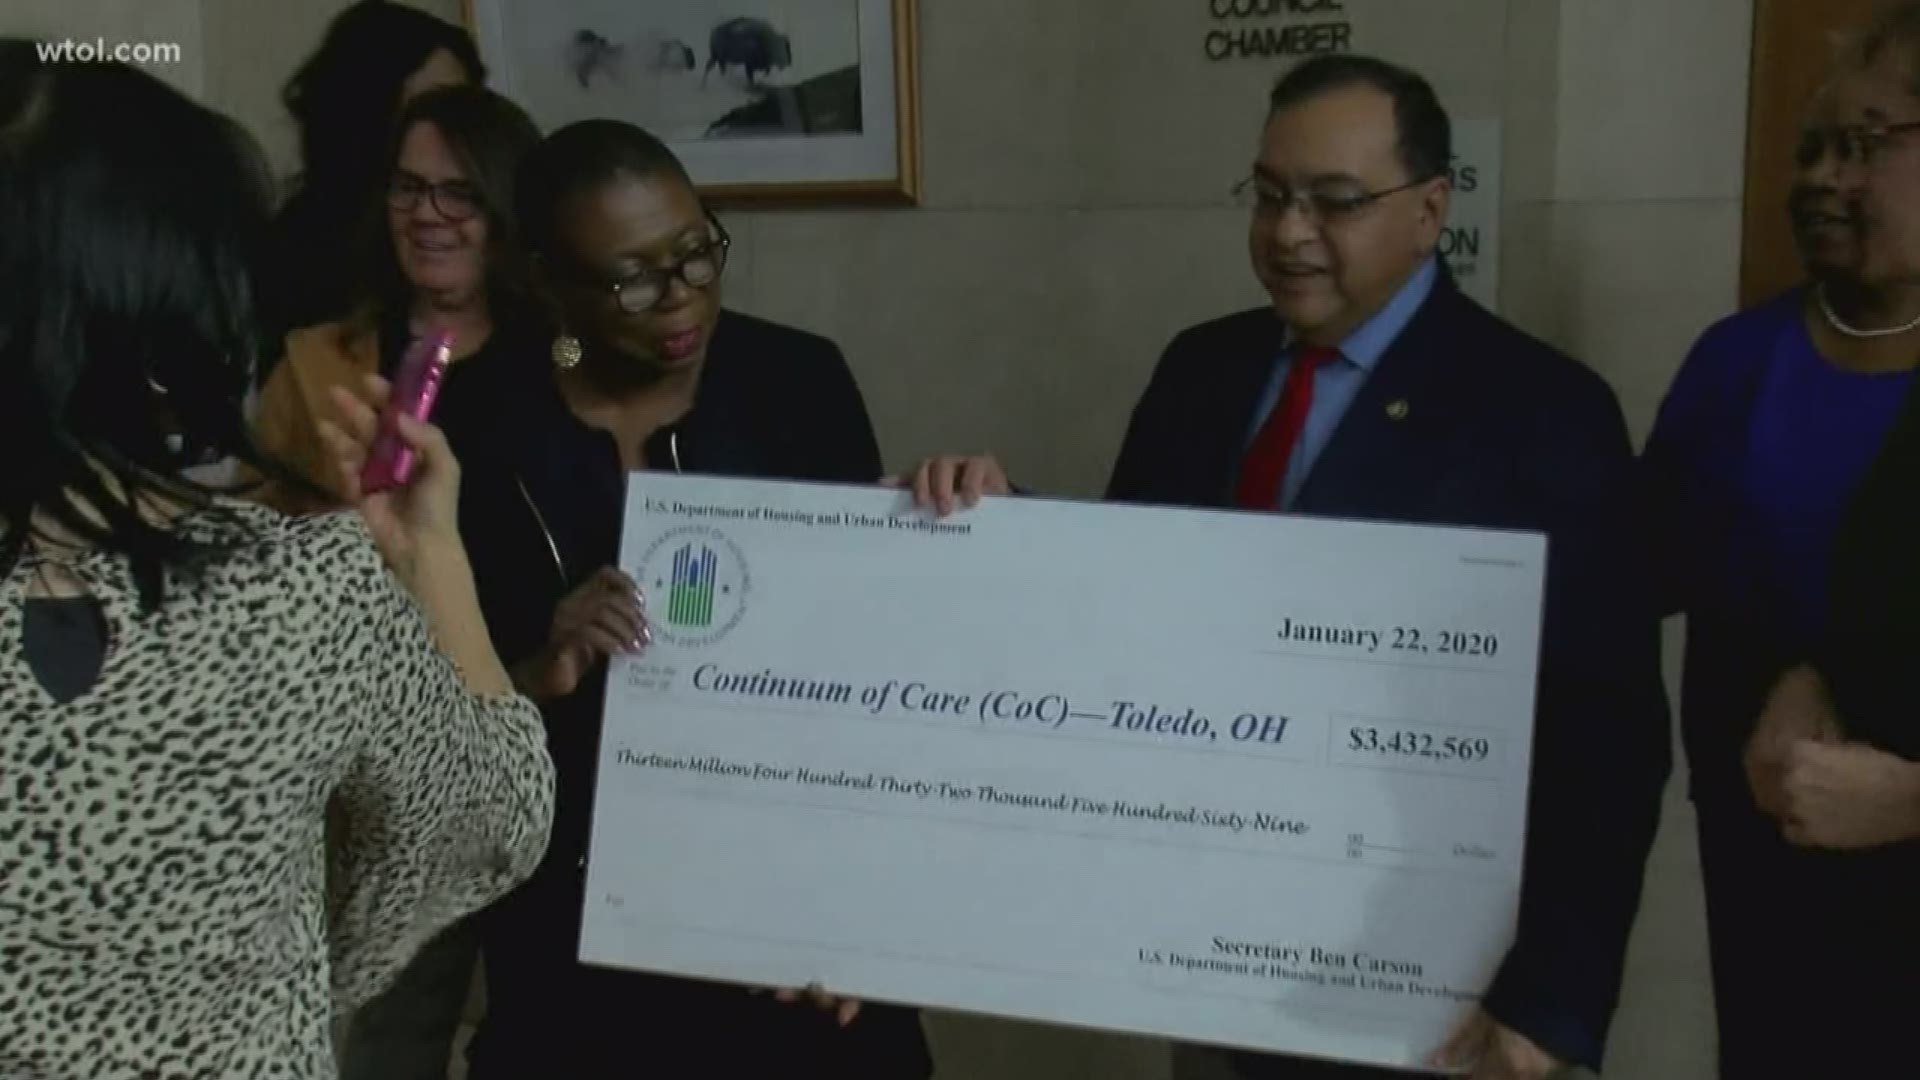 With the help of a generous grant, the City of Toledo will make improved strides towards eliminating homelessness.